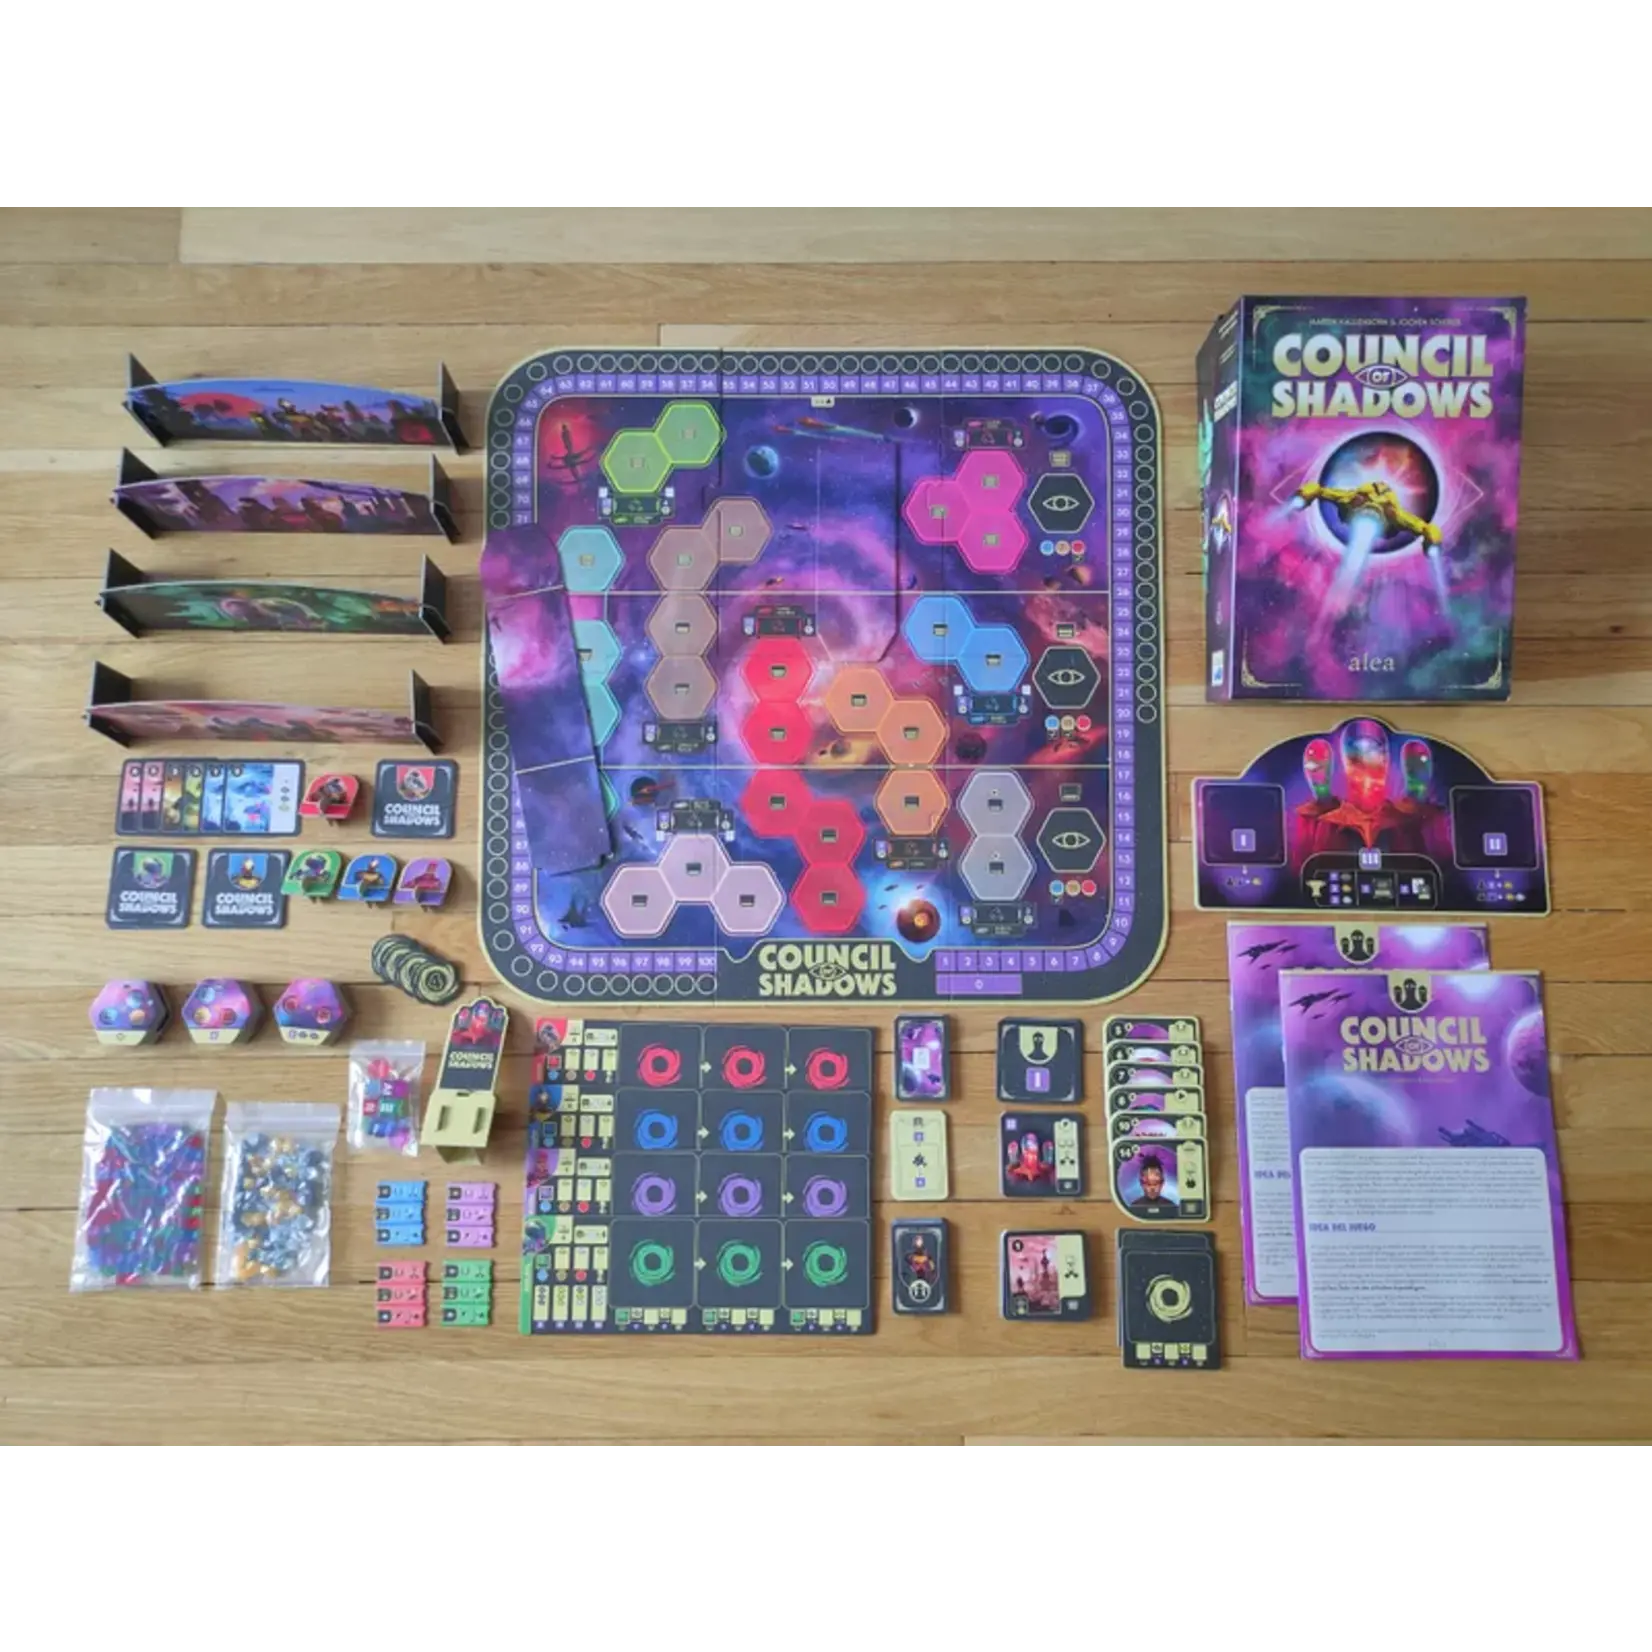 The Council of Shadows Game